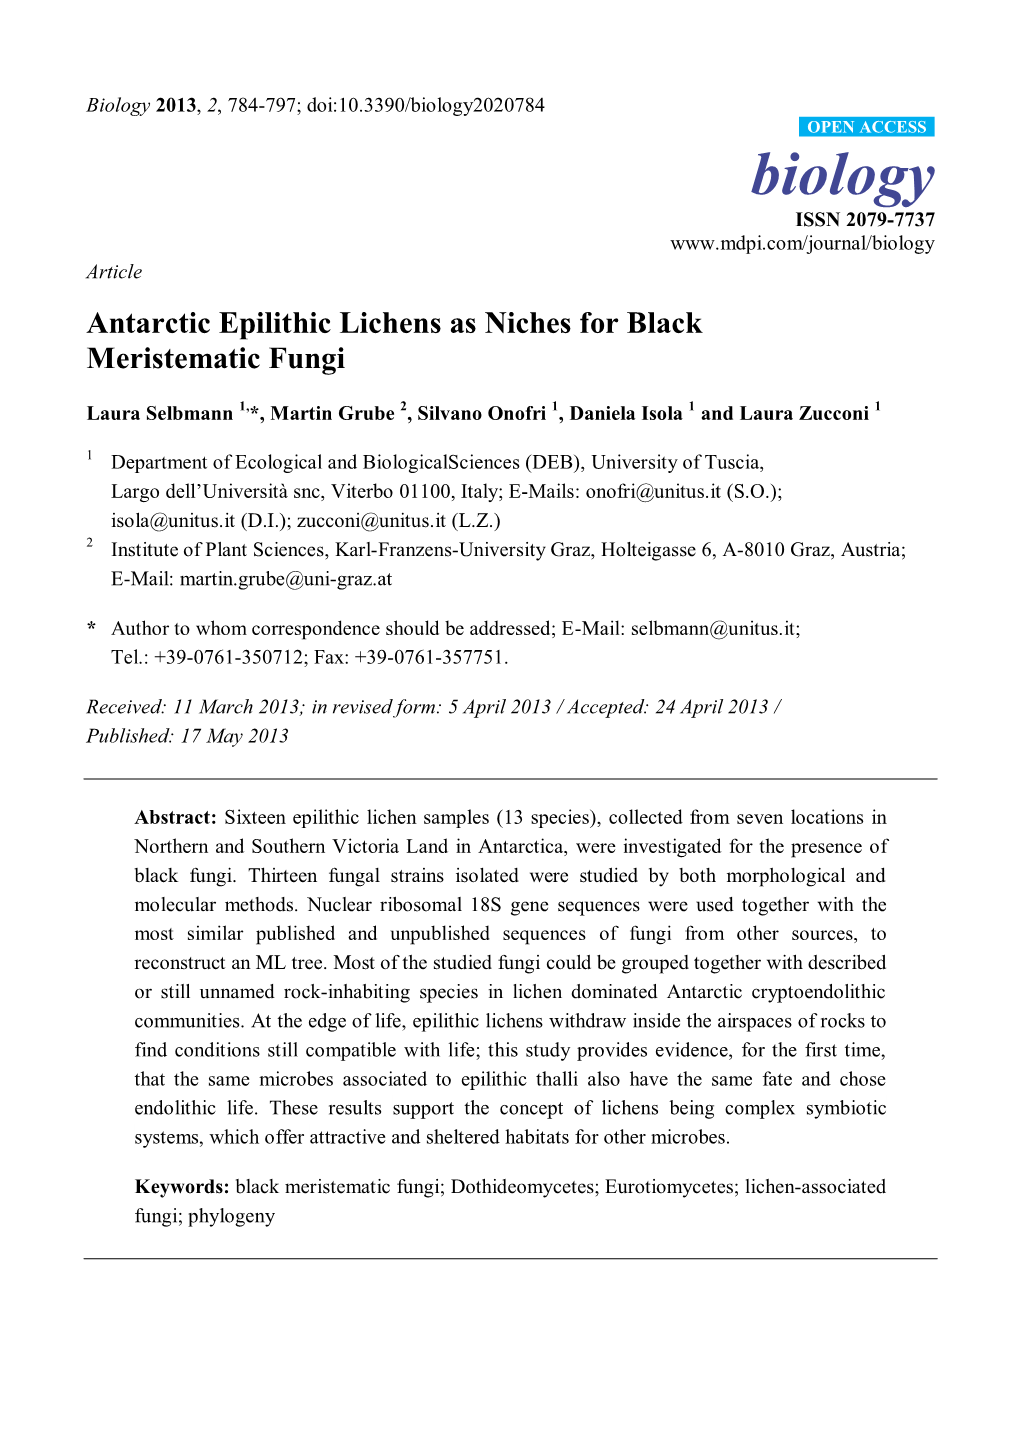 Antarctic Epilithic Lichens As Niches for Black Meristematic Fungi